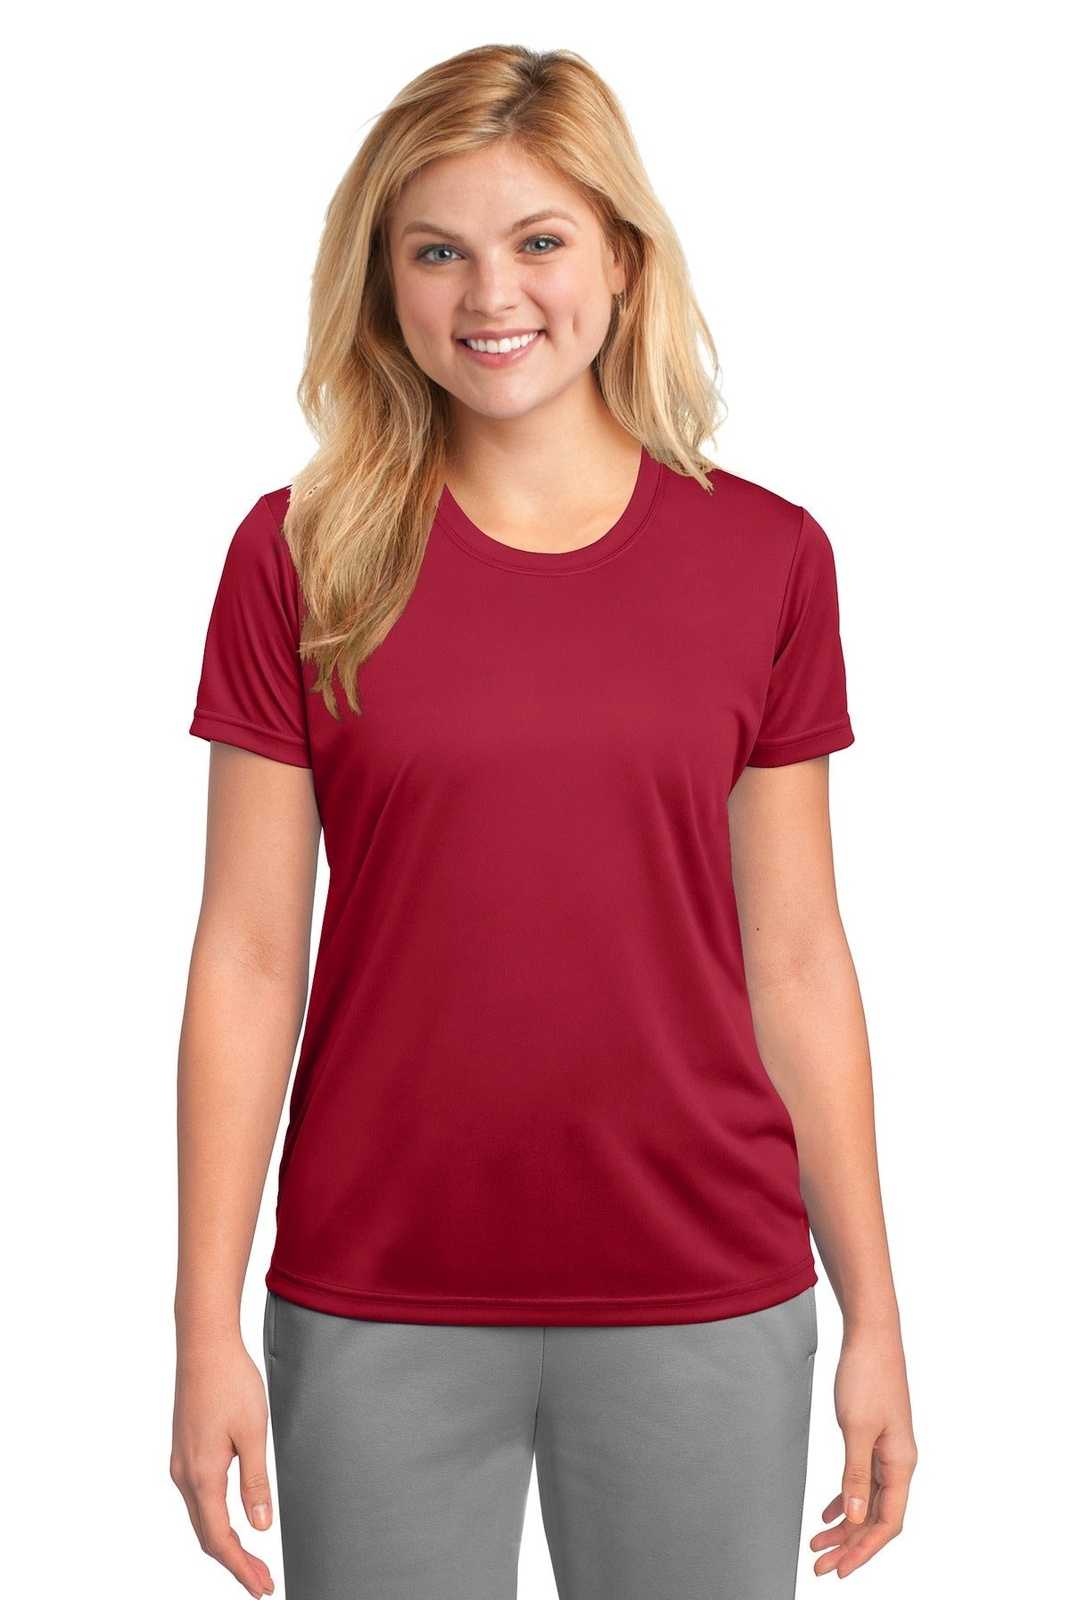 Port & Company LPC380 Ladies Performance Tee - Red - HIT a Double - 1